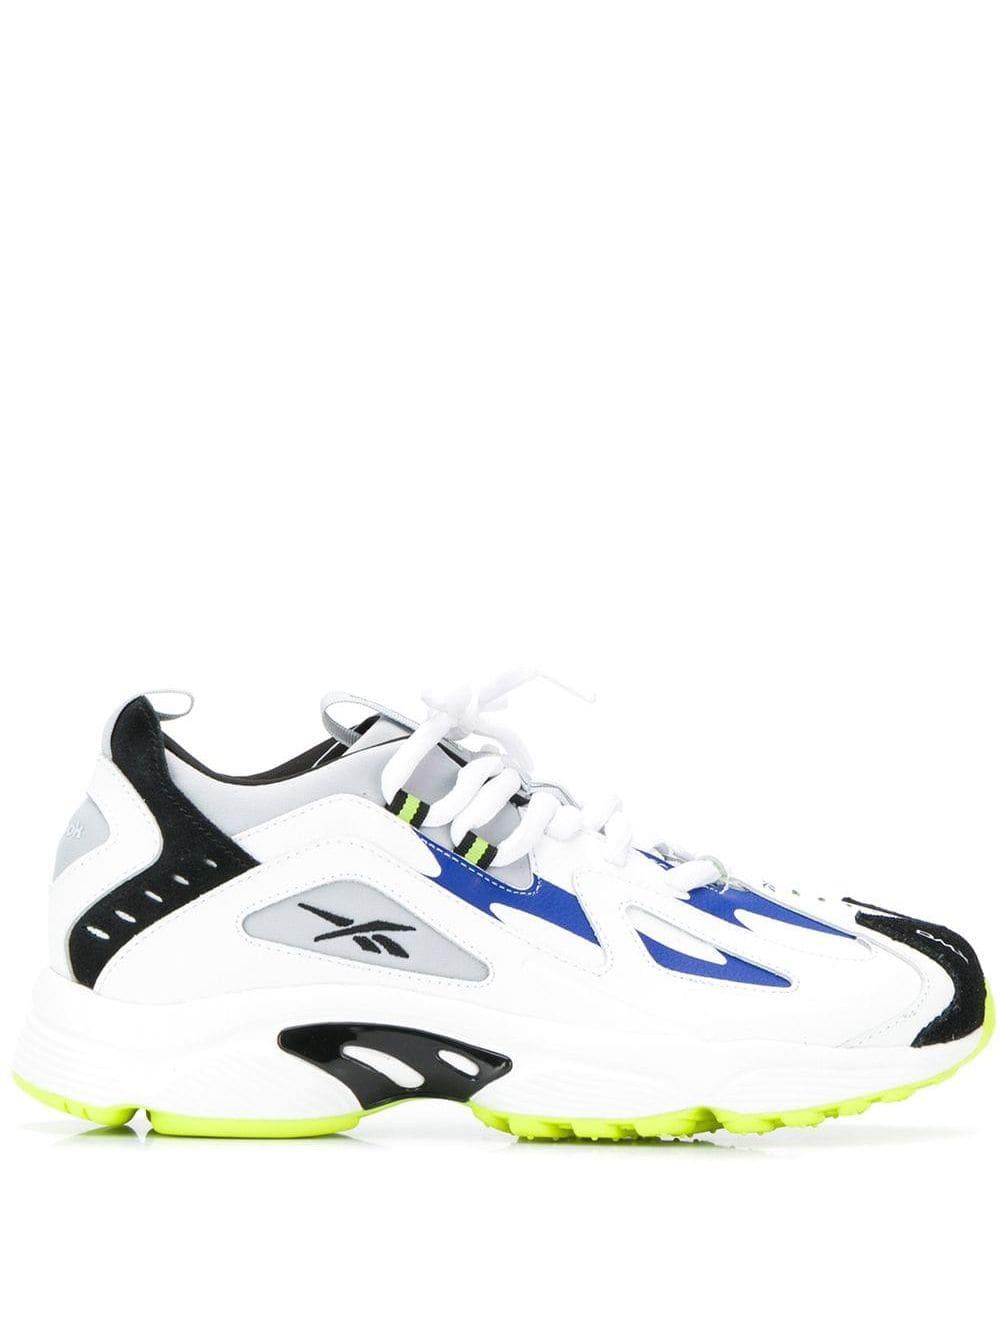 Reebok Leather Dmx Series 1200 Sneakers in White for Men - Lyst